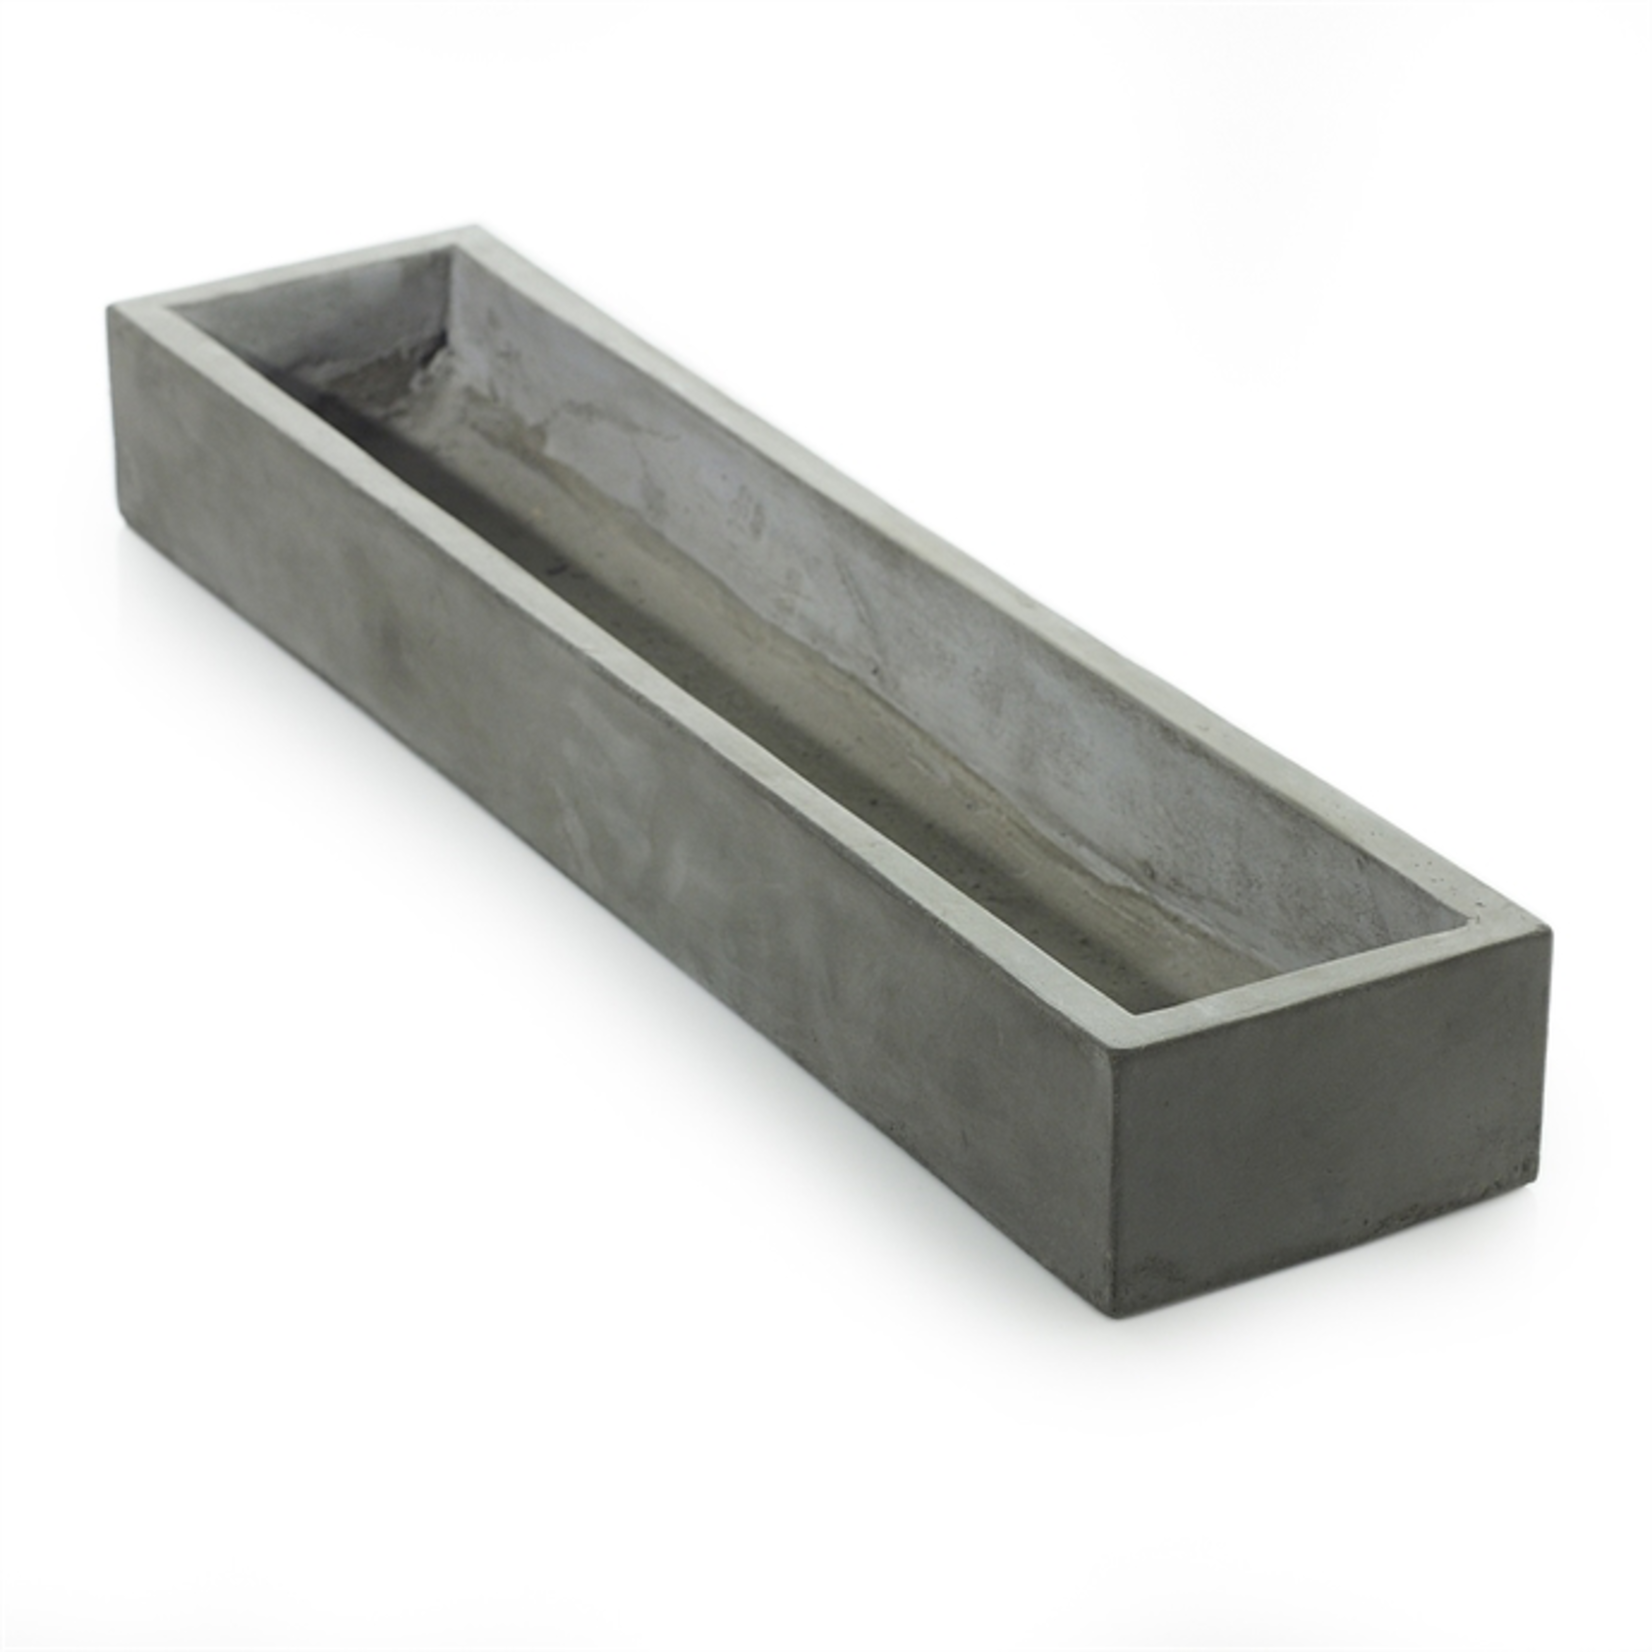 40% off was $52 now $31.19. 31.5" x 7" x 4” NEWPORT PLANTER(AD)